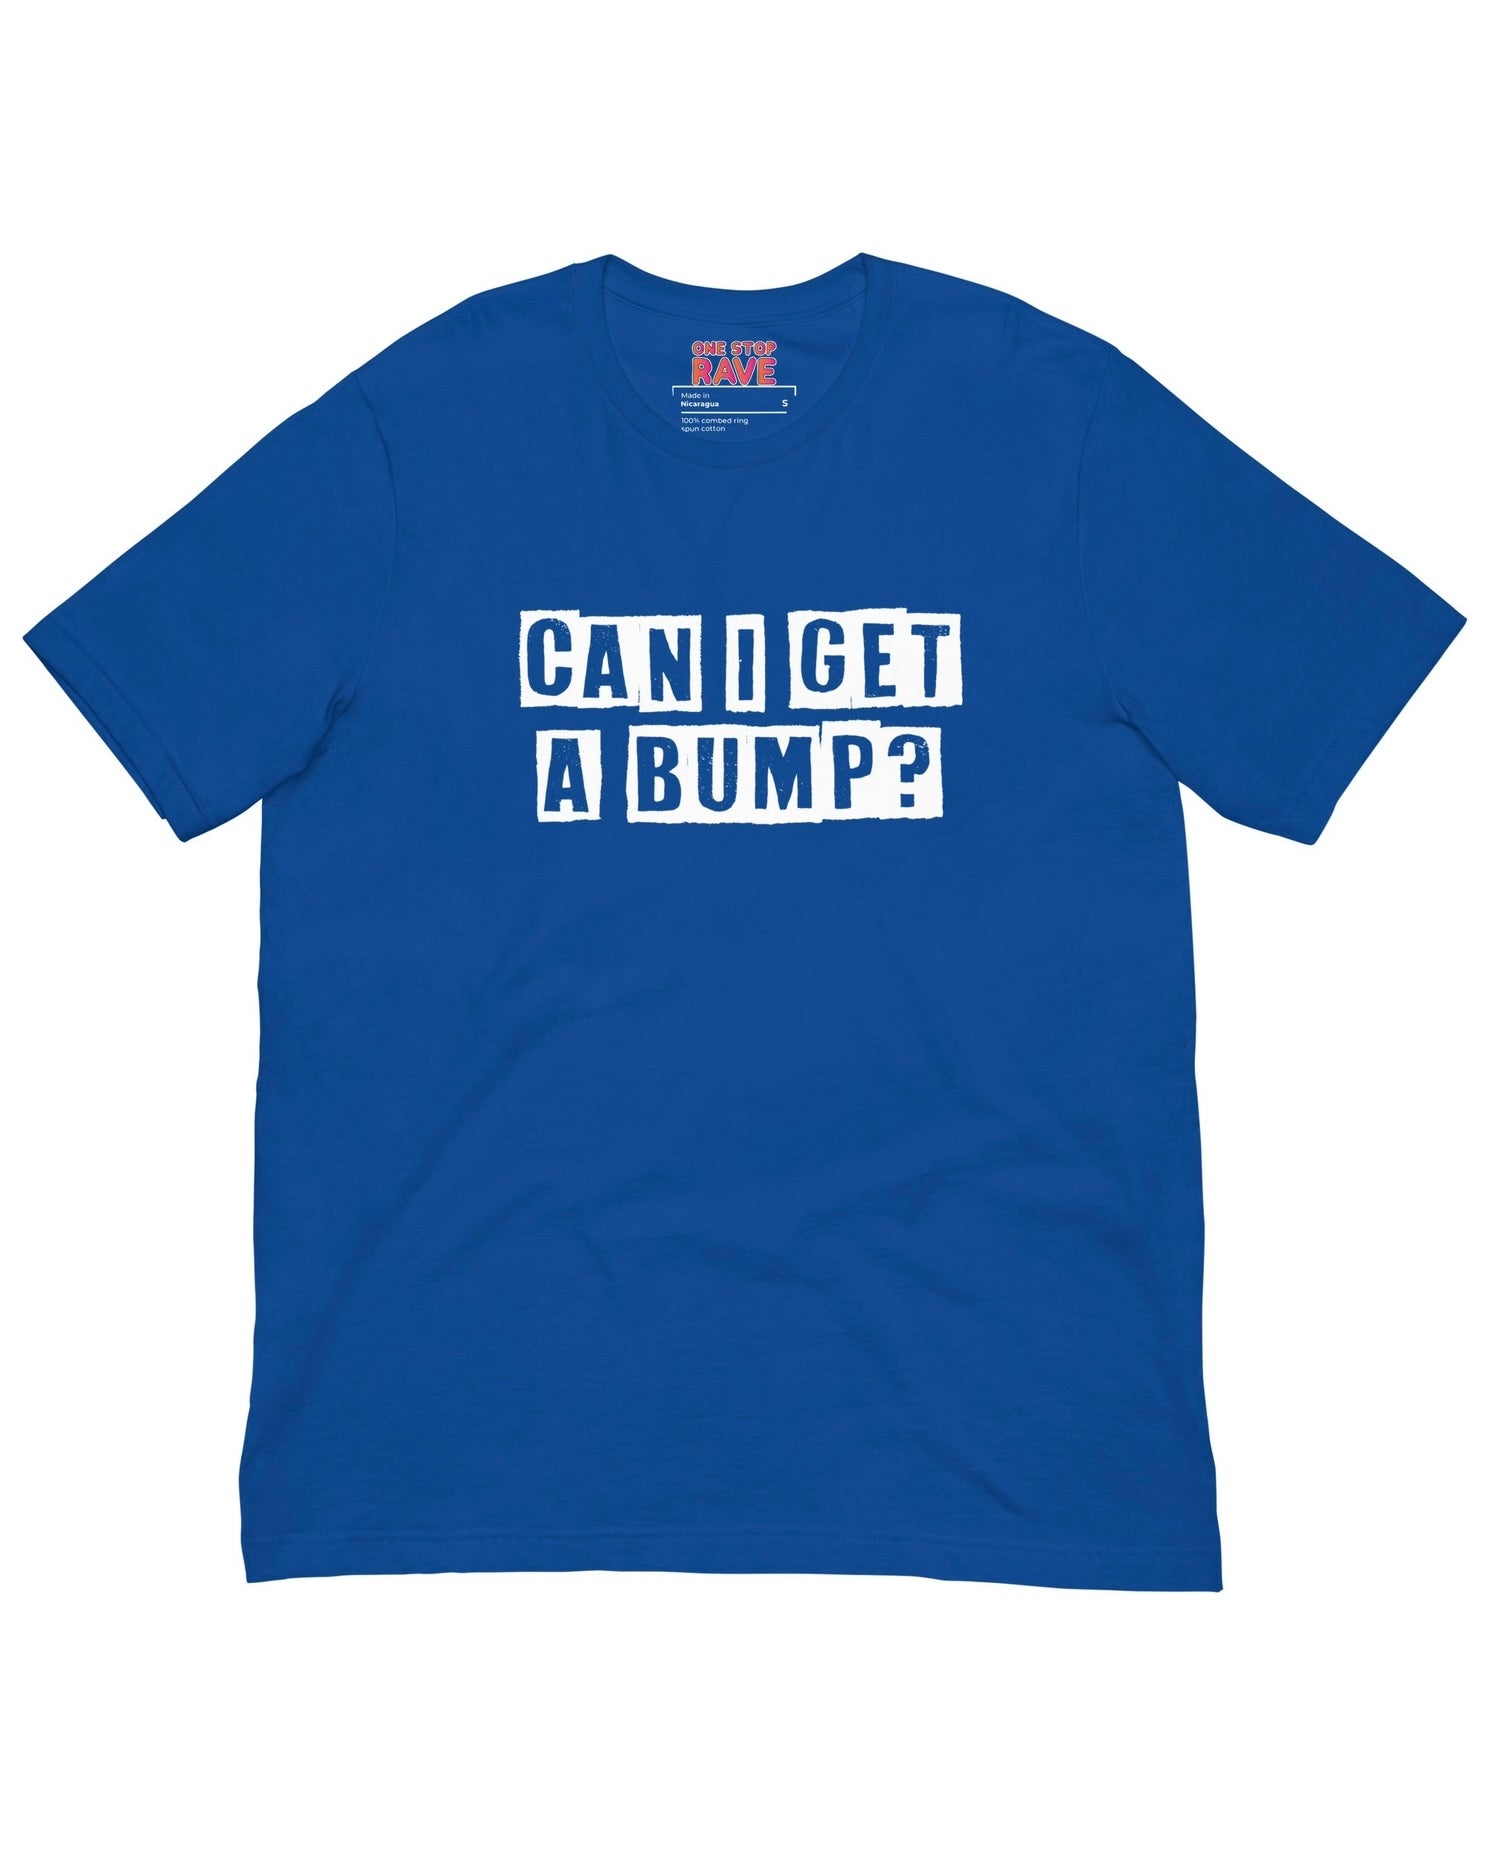 True Royal Blue t-shirt with the phrase "CAN I GET A BUMP?" & OSR label